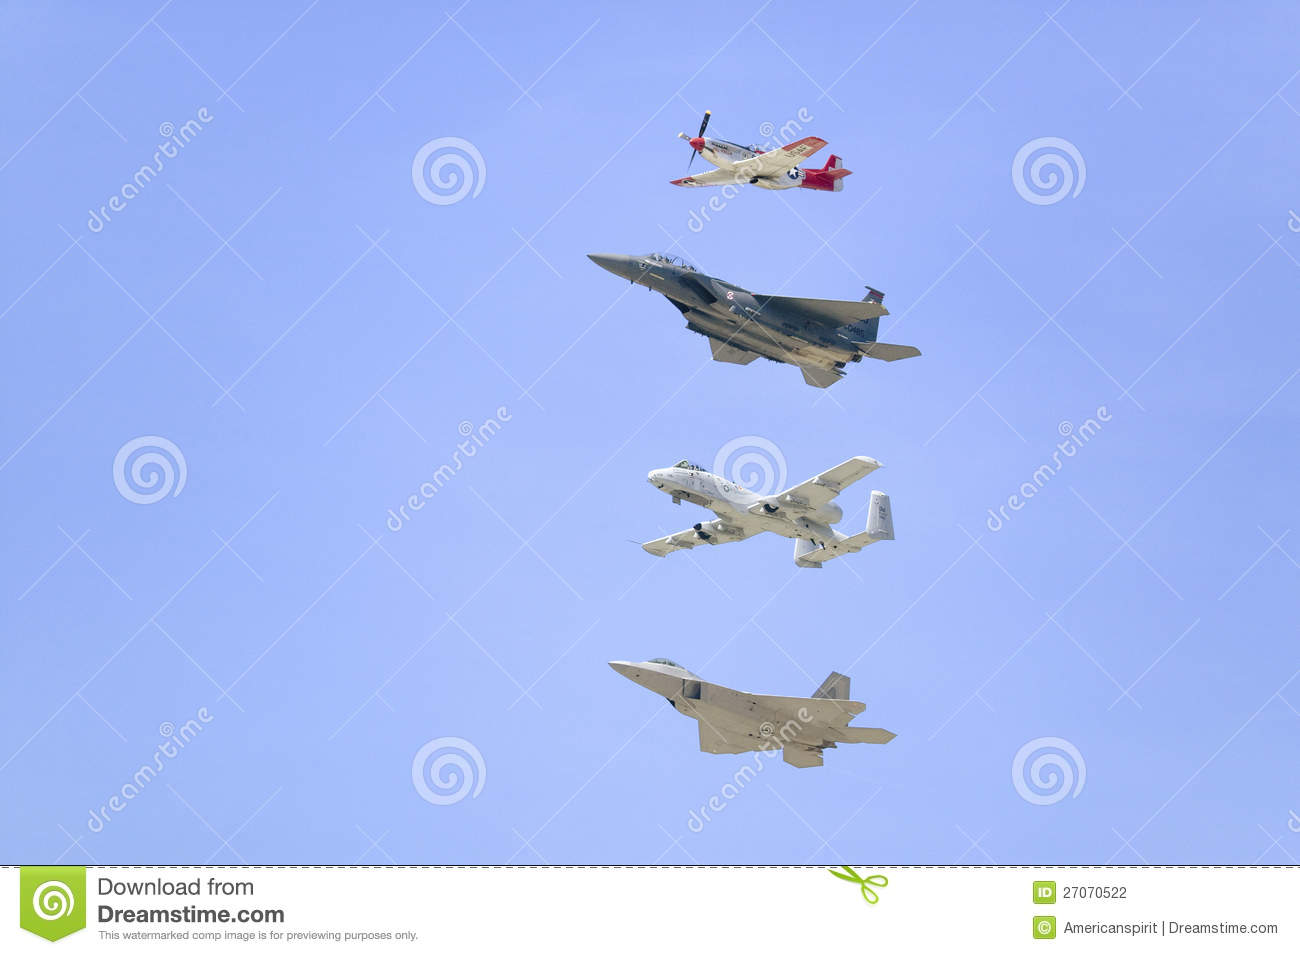 United States Air Force Editorial Photography   Image  27070522